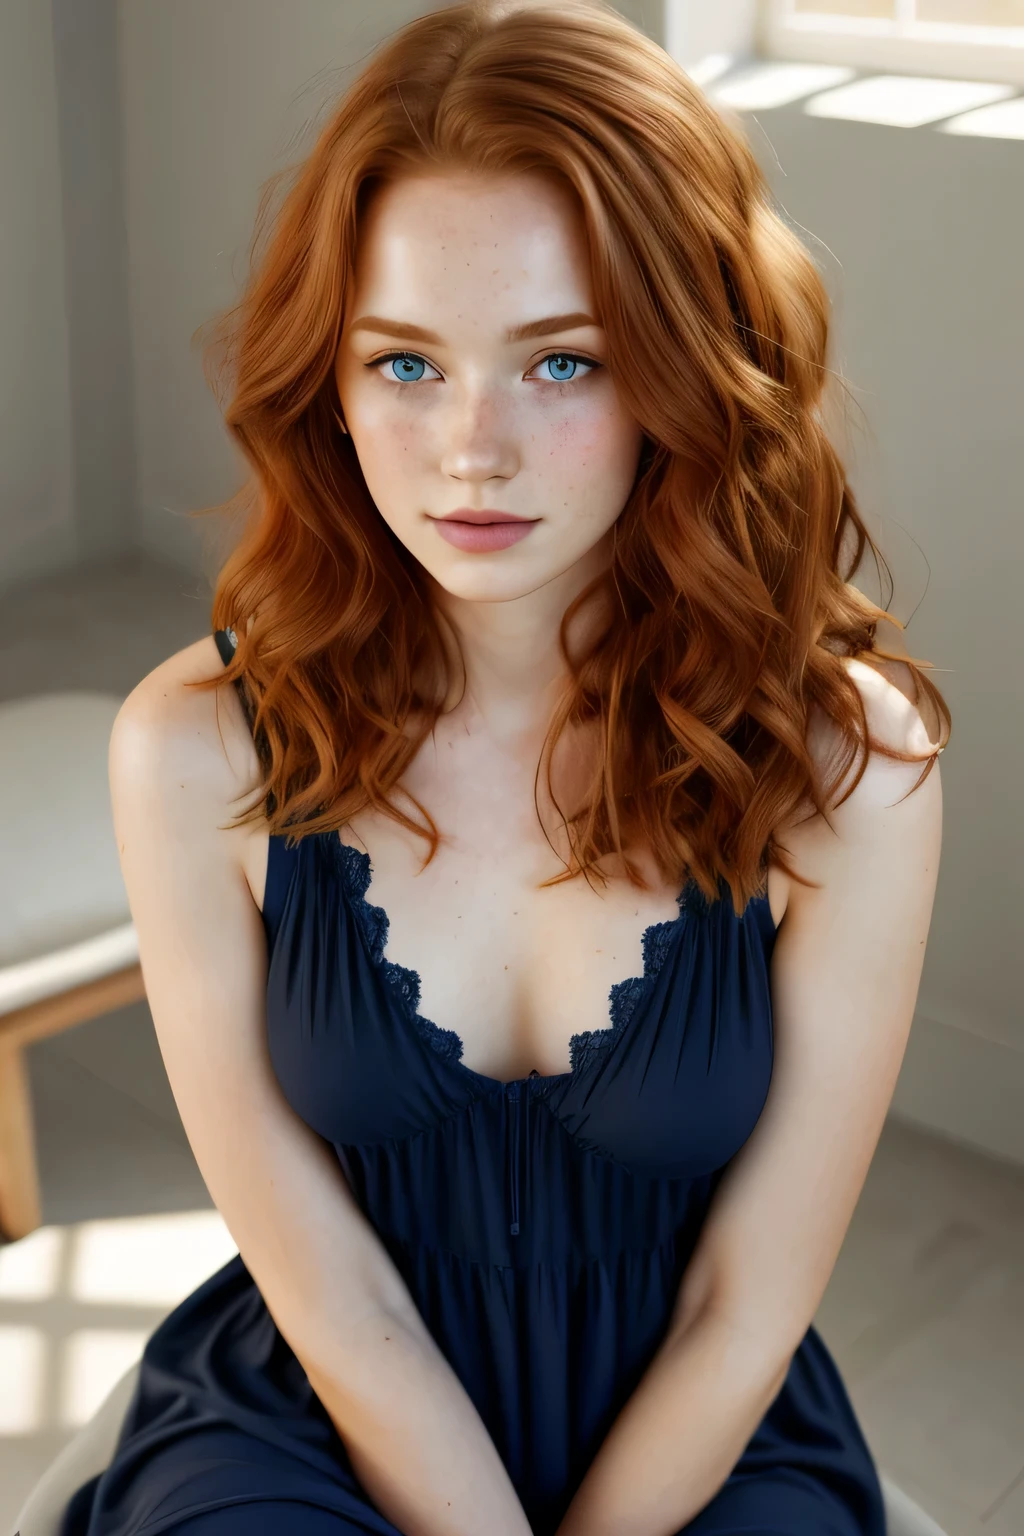 1girl in, age19, Solo, Aesthetic artwork, irish redhead, wavy ginger hair, shoulder length ginger hair, gray eyes, light grey eyes, some small freckles, pale skin, A-cup, small breasts, runners body, (textured skin, skin pores:1.1), (moles:0.8), imperfect skin, goosebumps, sitting down having coffee, drinking coffee, (extremely detailed 8k wallpaper), soft lighting, high quality, film grain, Fujifilm XT3 sharp focus, f 5.6, 50mm, High Detail, Sharp focus,(natural light), in a navy blue colored dress. A navy blue sundress, floral pattern sundress, crazy details, complex details, hyperdetailed, big , siting in hair gaming chair playing video games